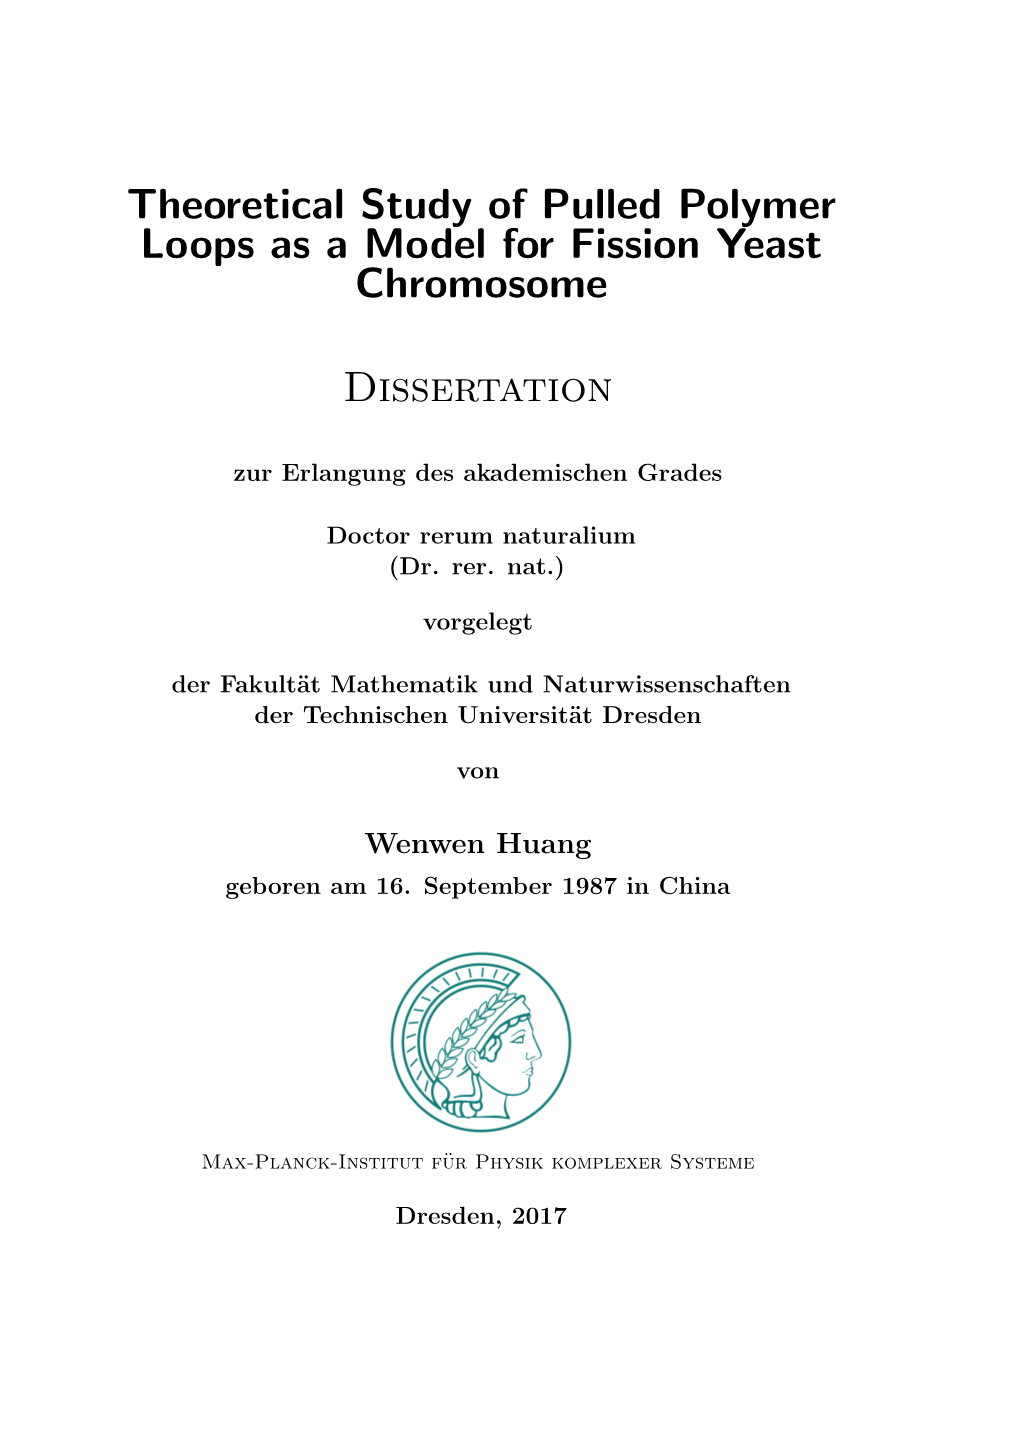 Theoretical Study of Pulled Polymer Loops As a Model for Fission Yeast Chromosome